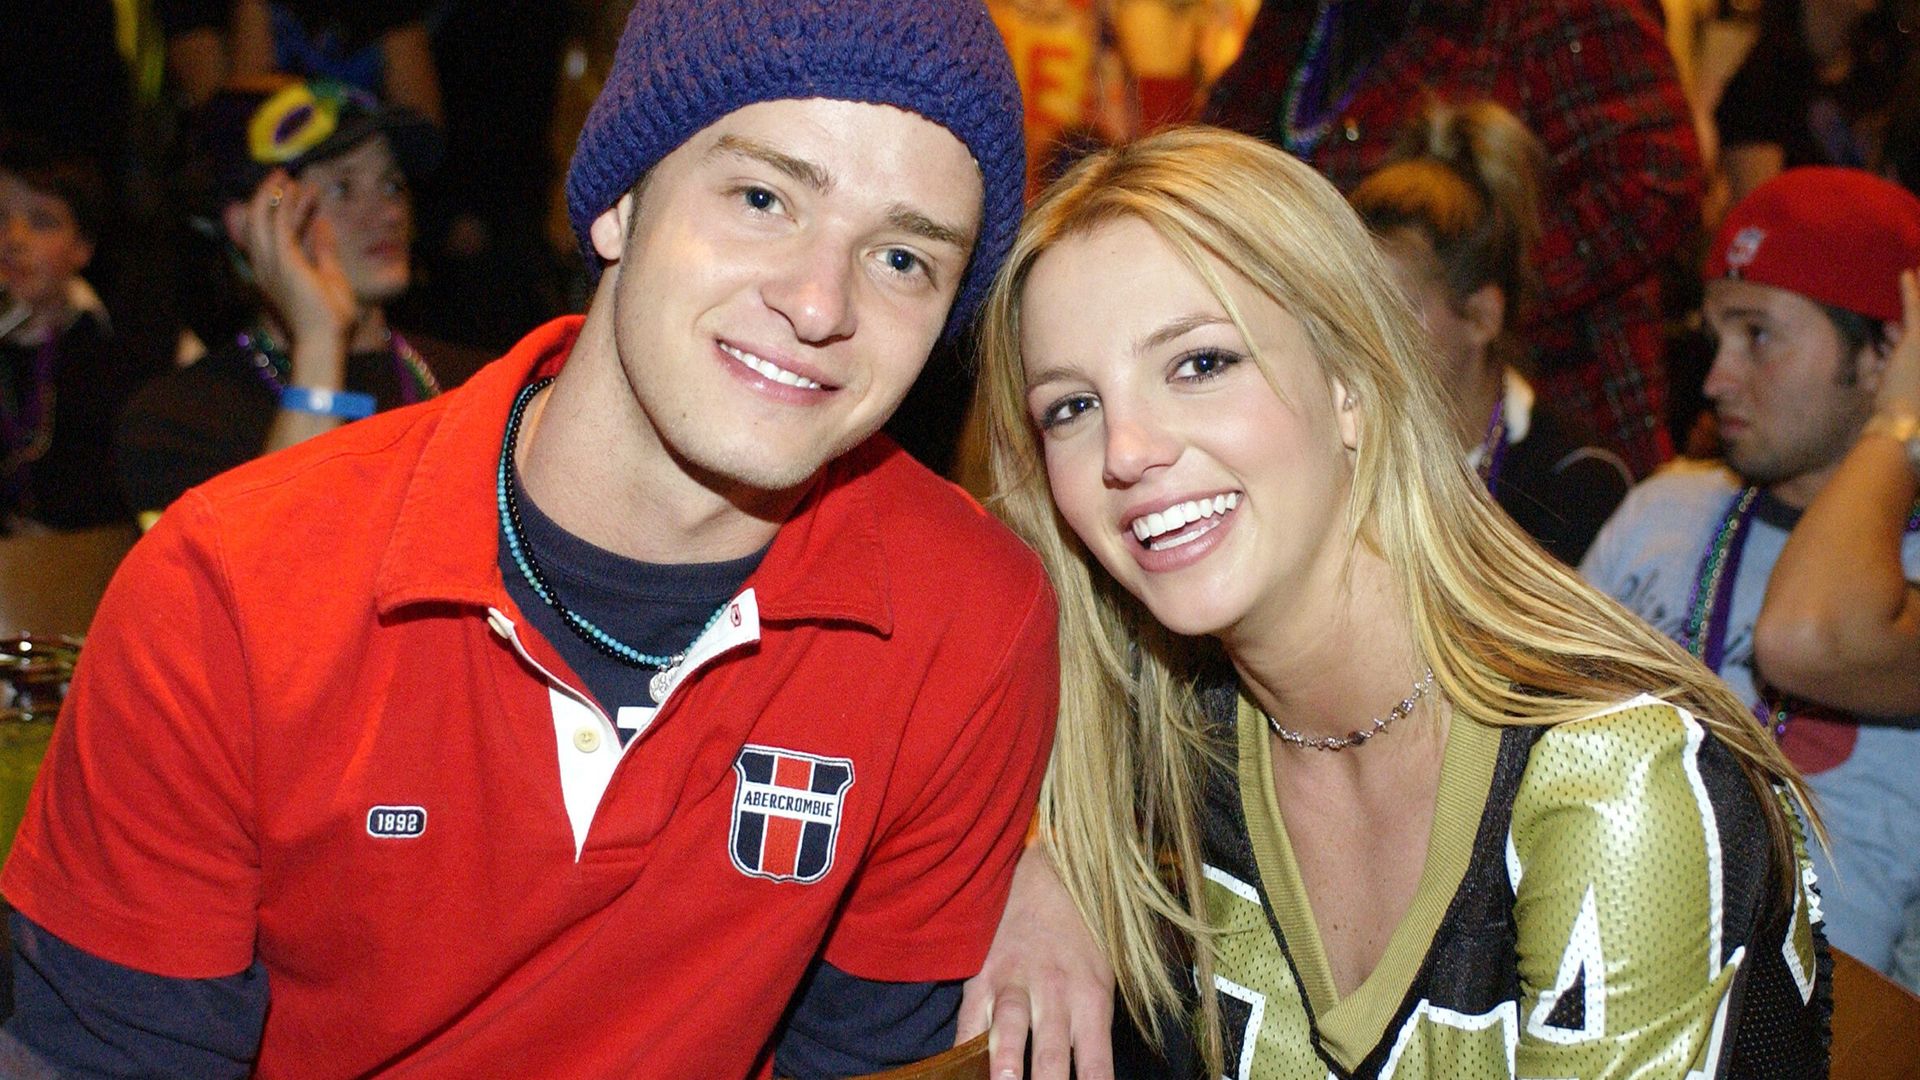 Britney Spears and Justin Timberlake in their youth